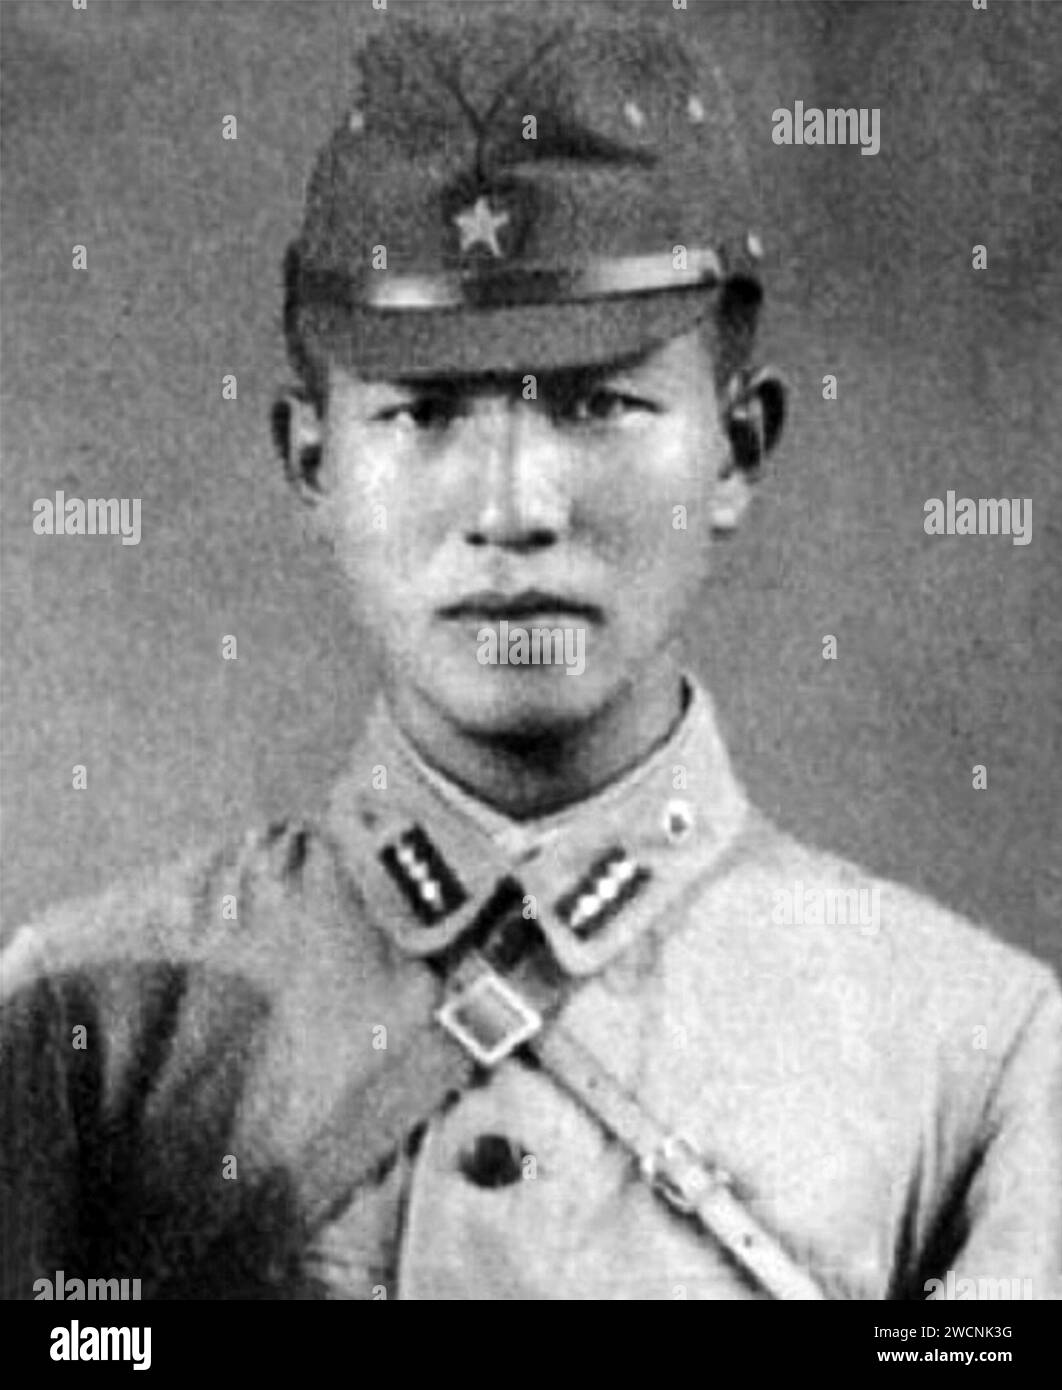 Hiroo Onoda, Hiroo Onoda (1922-2014), c. 1944. Hiroo Onoda (1922 – 2014) Imperial Japanese Army intelligence officer who fought in World War II and did not surrender at the war's end in August 1945 spending 29 years hiding in the Philippines Stock Photo